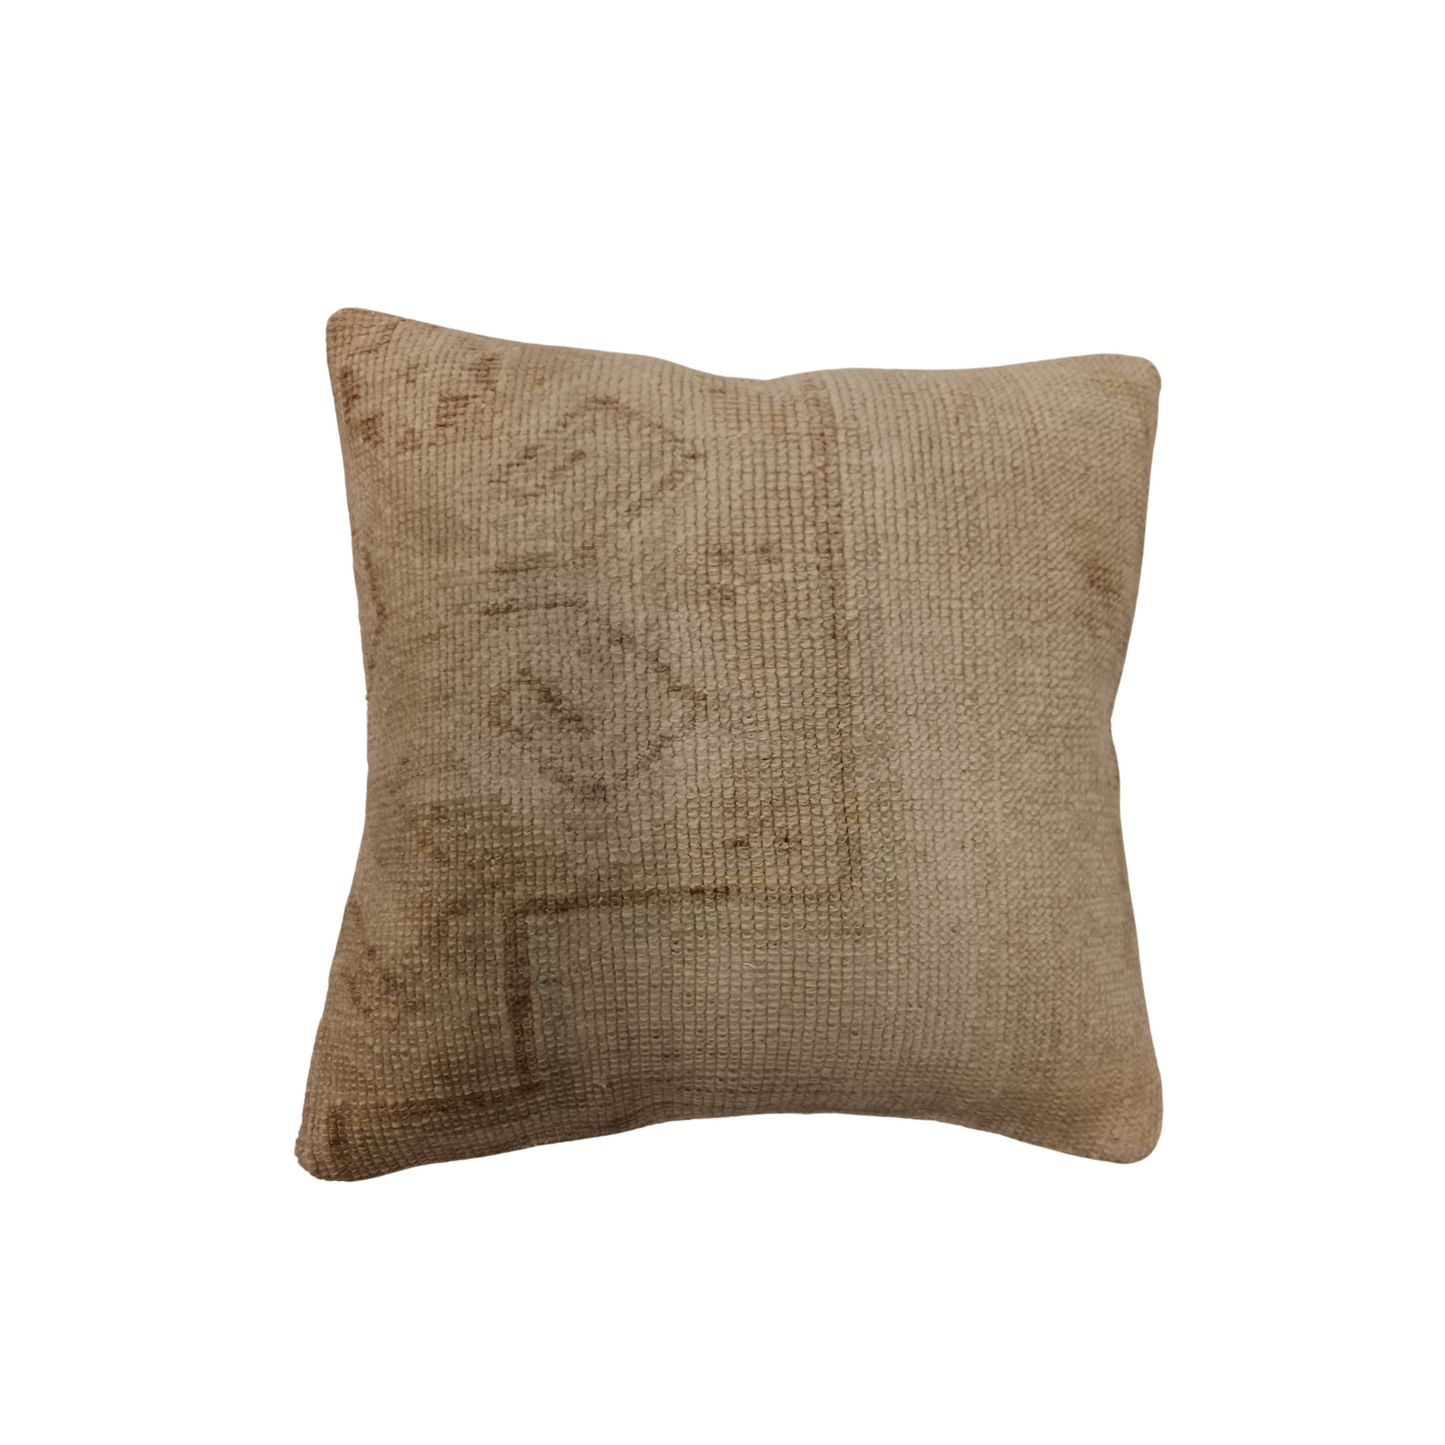 One of a Kind Vintage Pillow - Desert